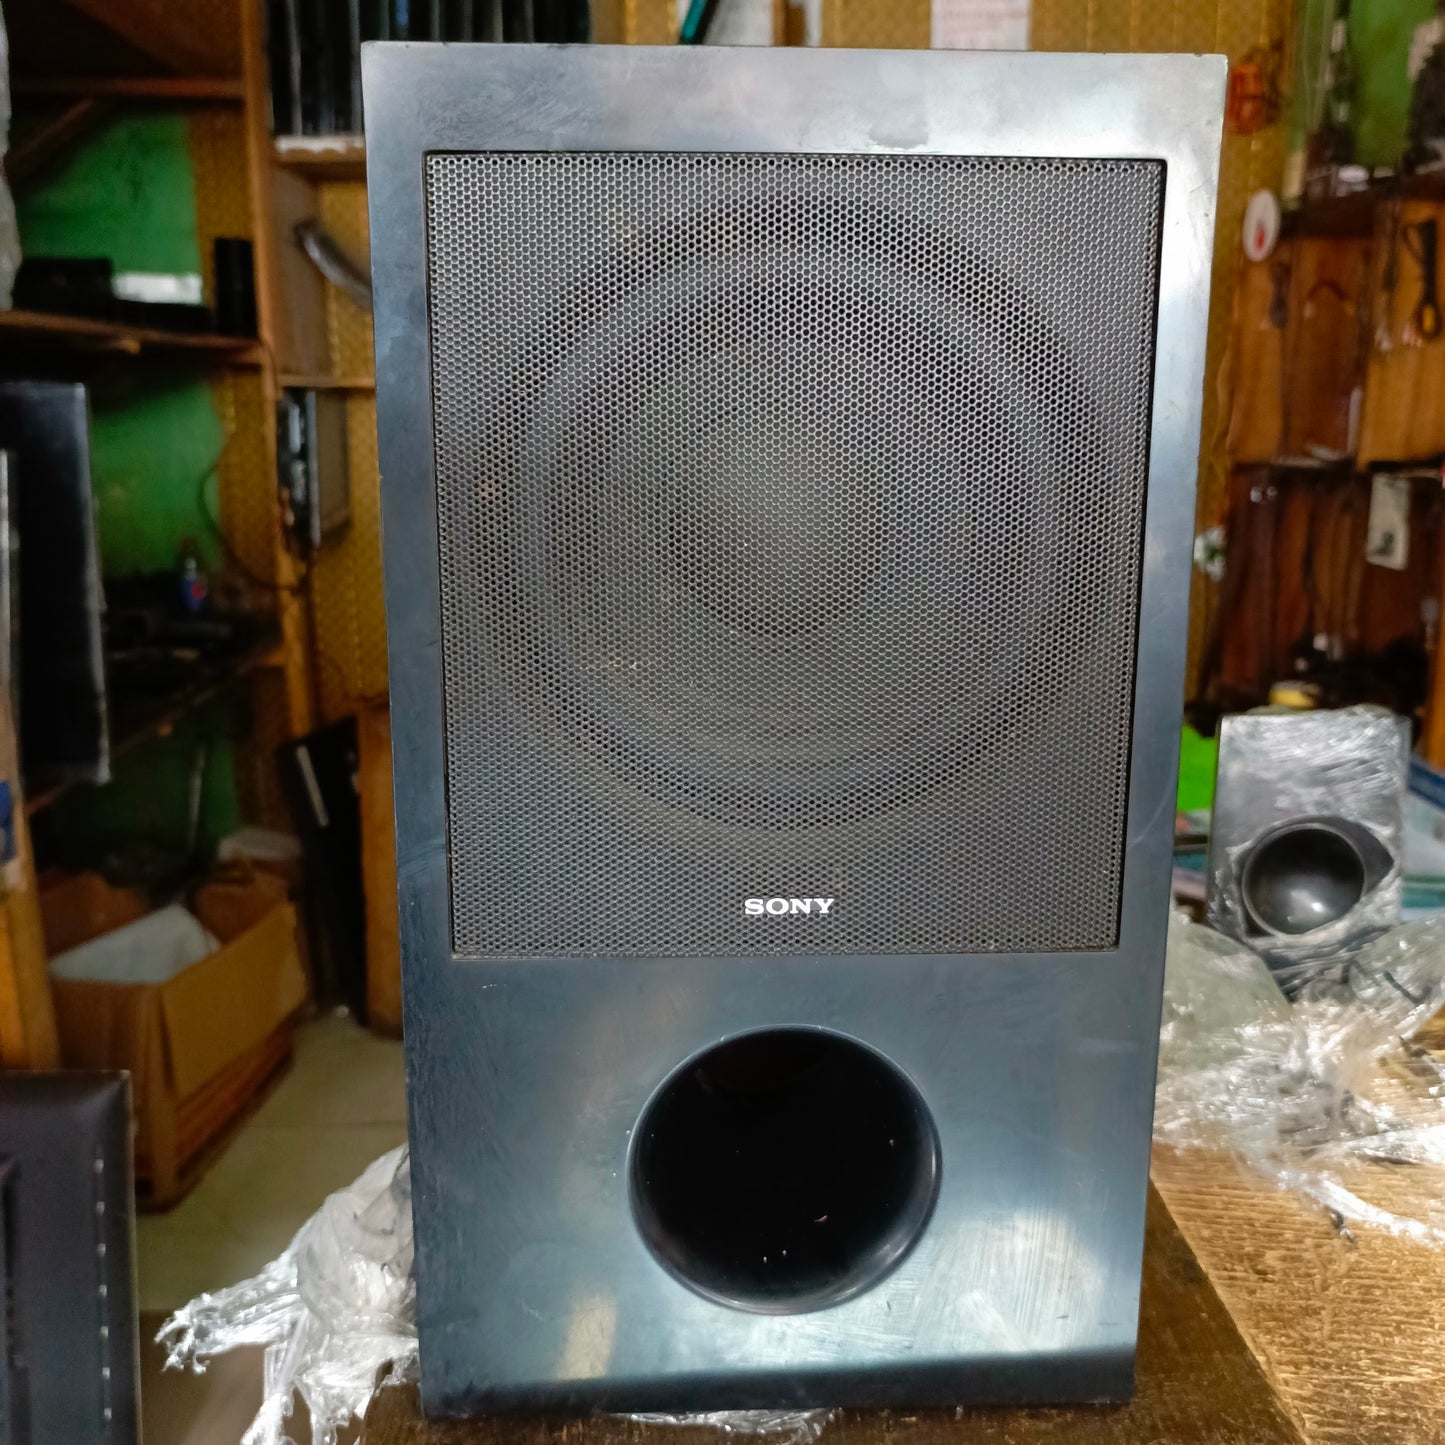 SONY SS-WS102 3ohms Home Theater Passive Subwoofer - Foreign Used